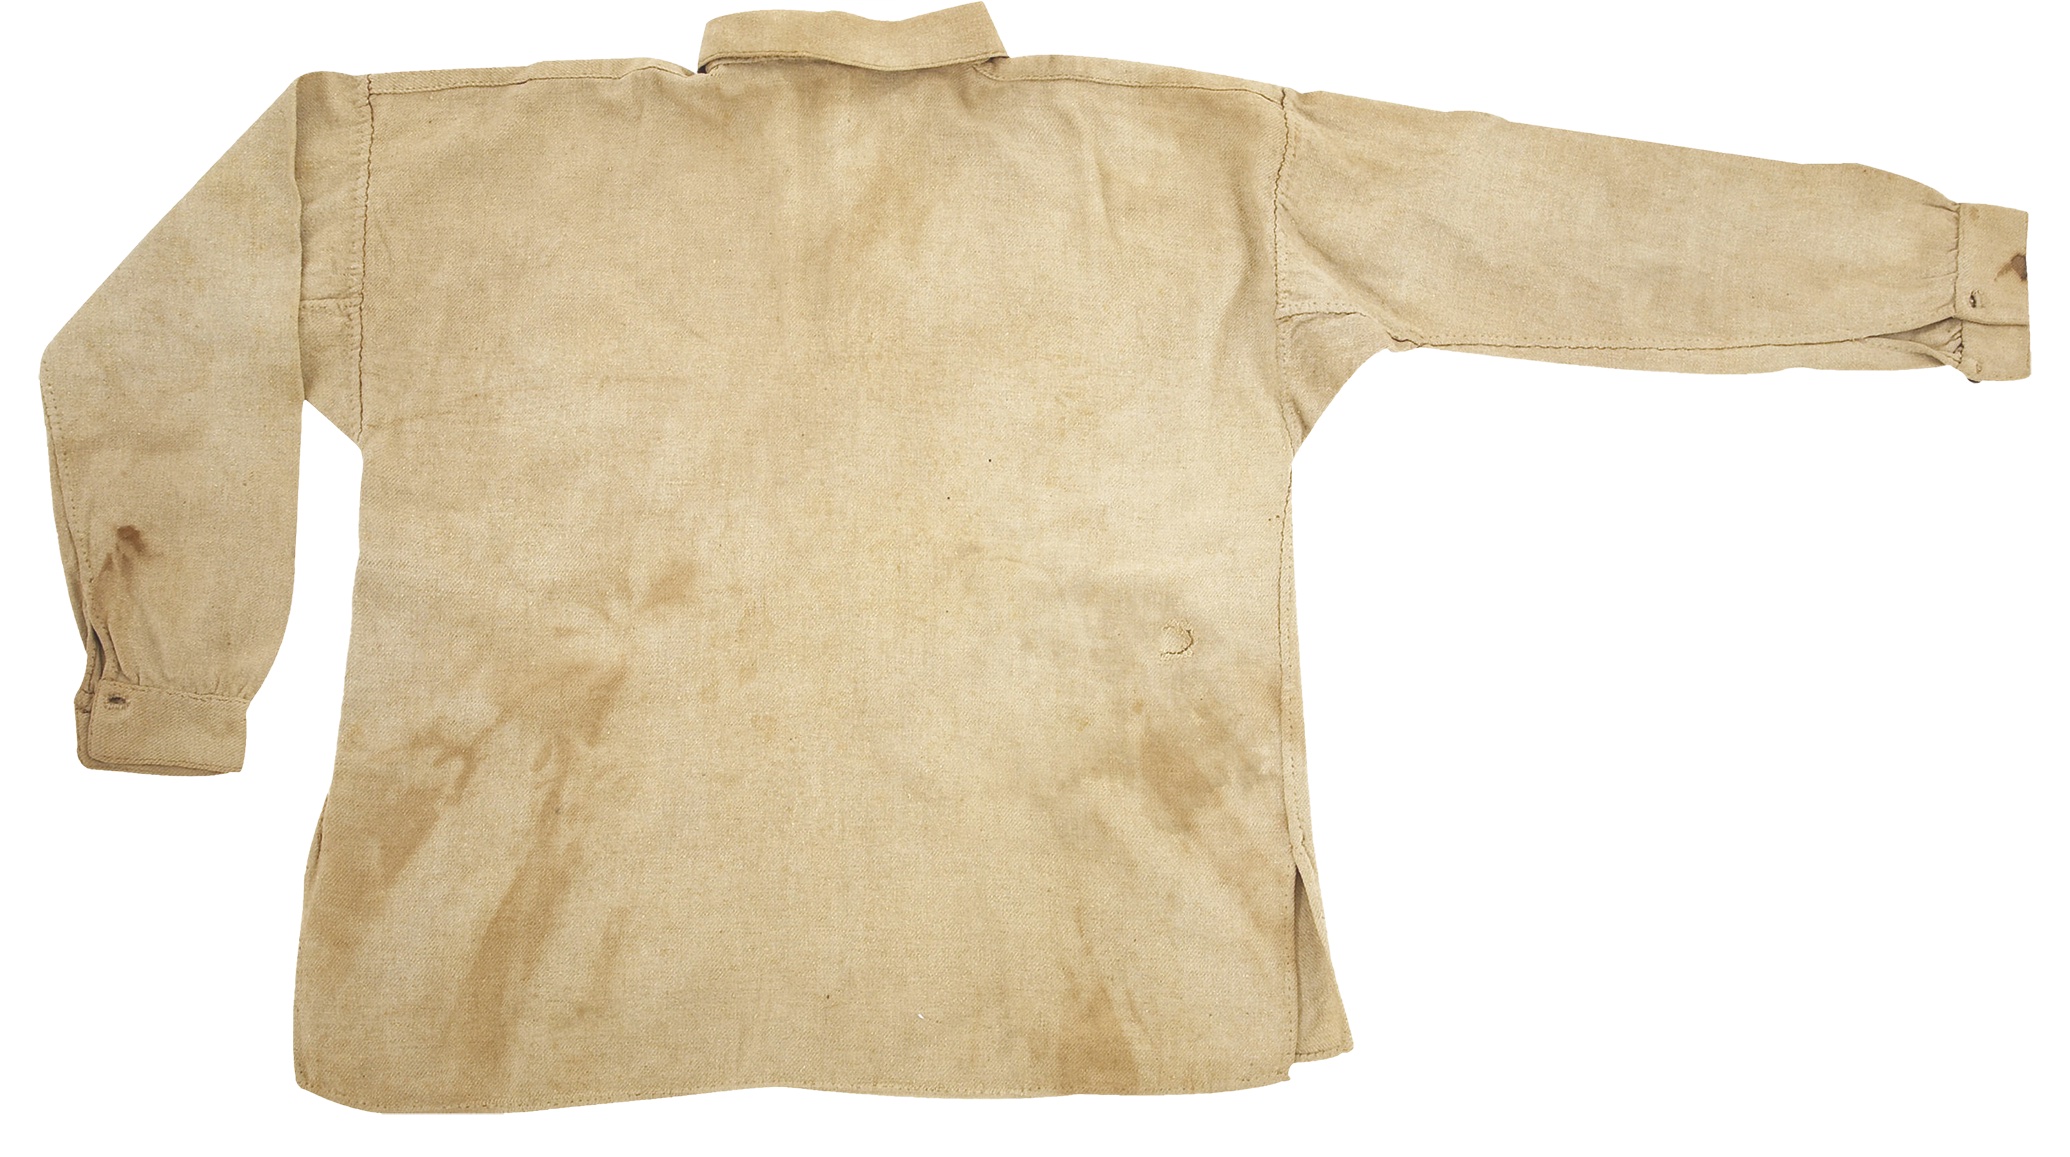 Private Monroe Barnea of the 1st Michigan Light Artillery, part of Brig. Gen. George Morgan’s 3rd Brigade, was shot in the back while servicing his cannon during the fighting at Chickasaw Bayou. He was wearing this coarse wool military issue shirt at the time. The bullet hole, as well as his own bloodstains from the wound, are clearly visible on the garment. (Heritage Auctions, Dallas)